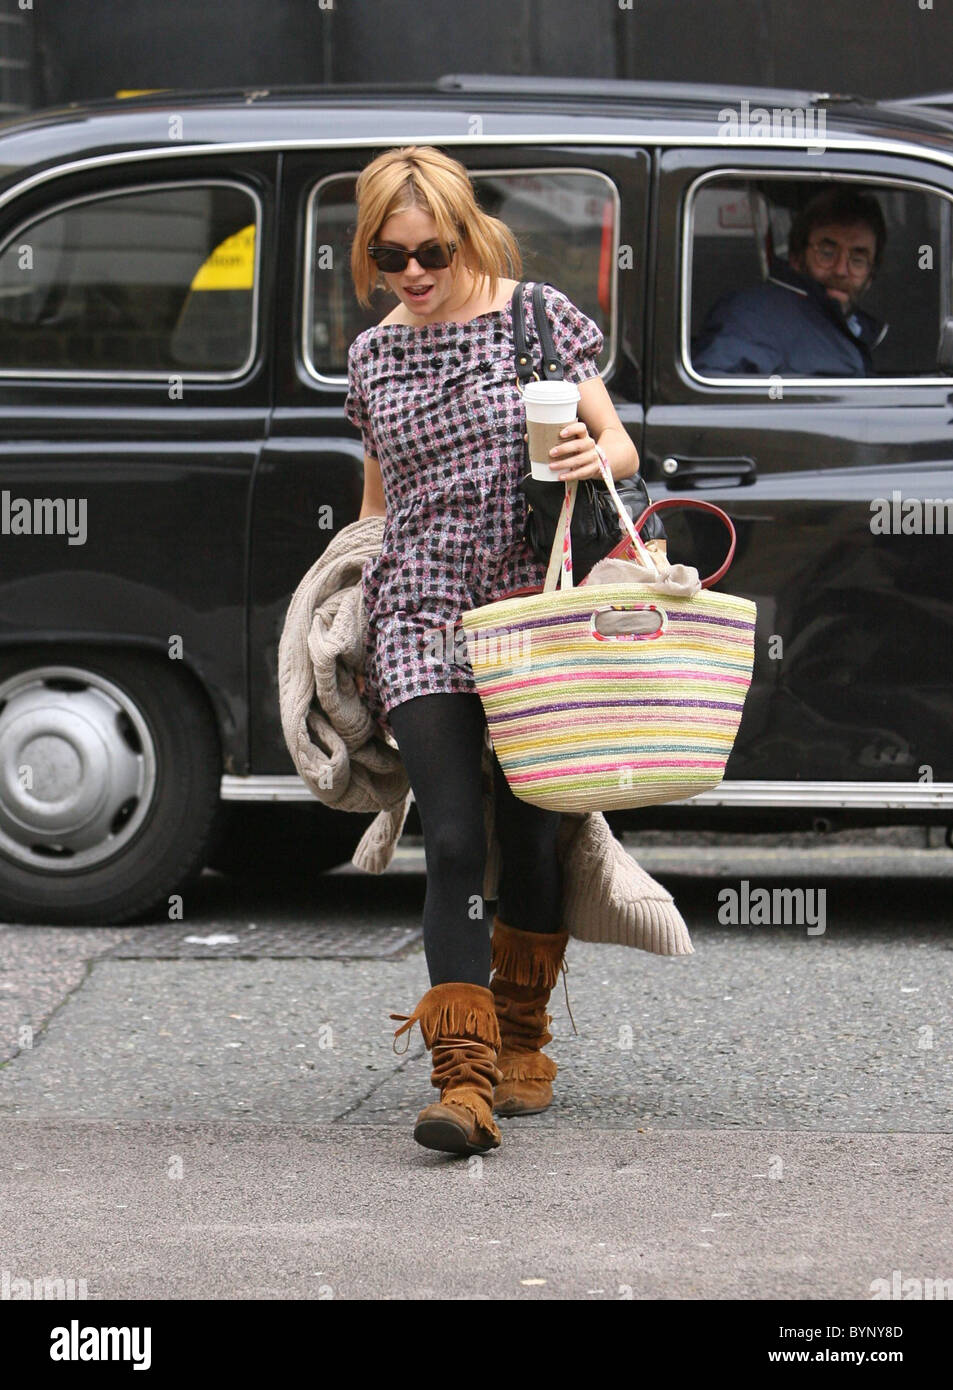 Sienna Miller arriving home after spending the night out London, England - 29.05.07 Stock Photo